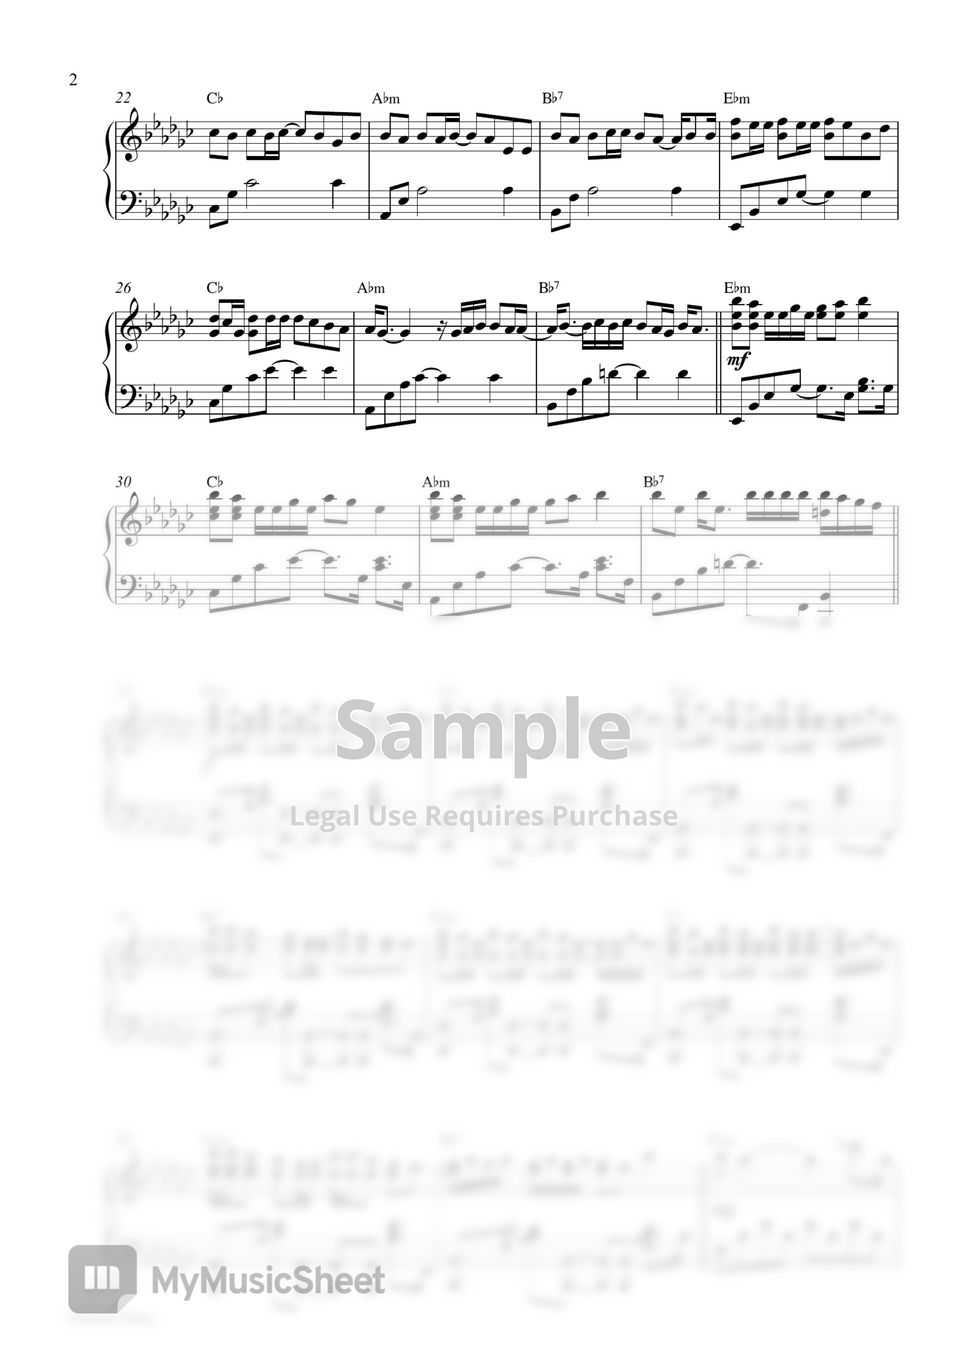 TXT - Opening Sequence (2 Piano PDF: Original Key & Easier Key) by Pianella Piano